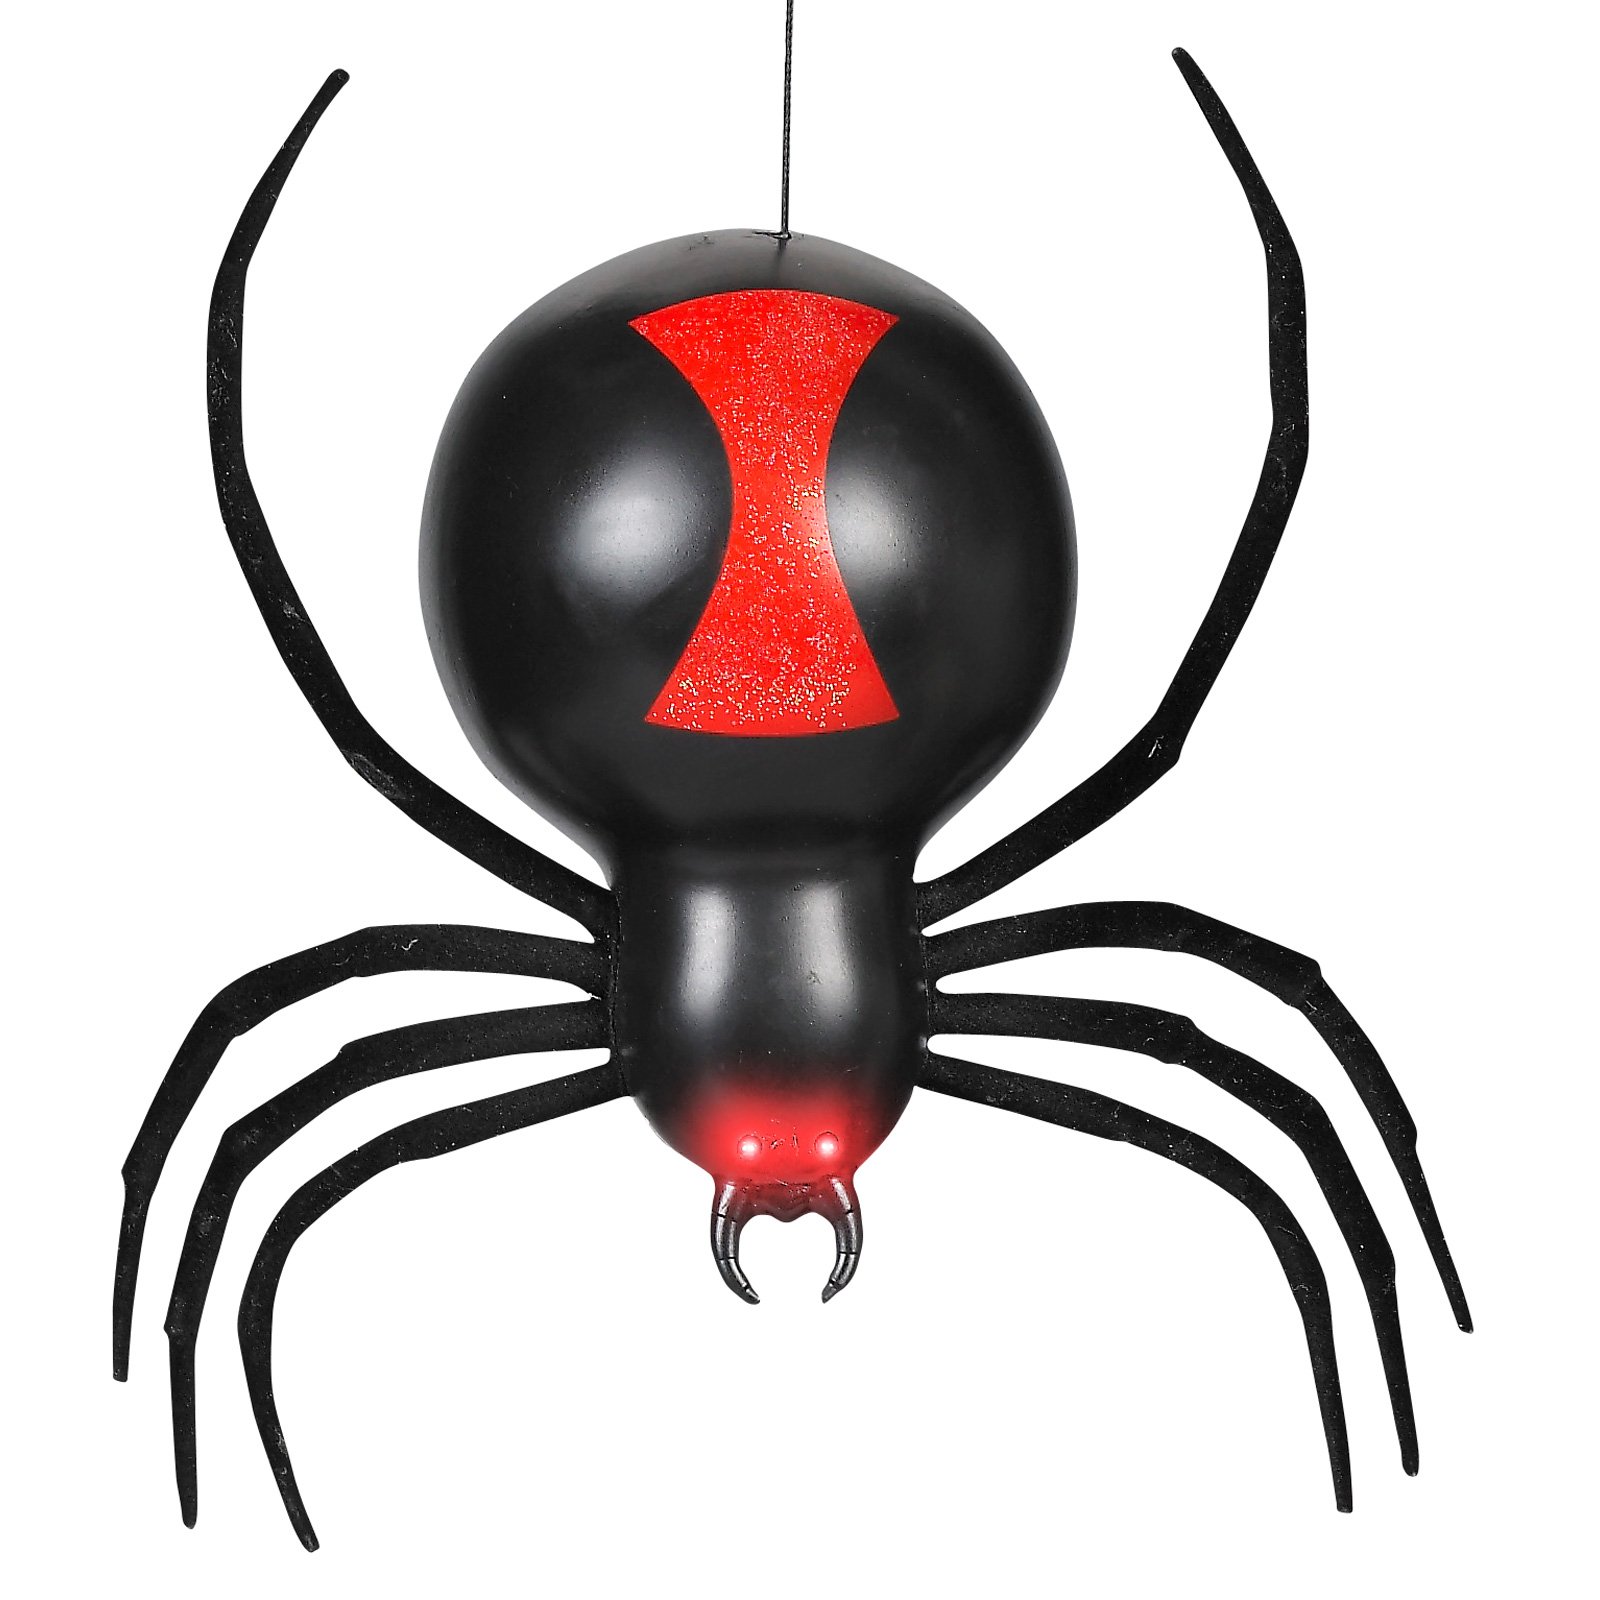 $16.16 Dropping Black Widow Spider Animated Prop at CostumesHut ...